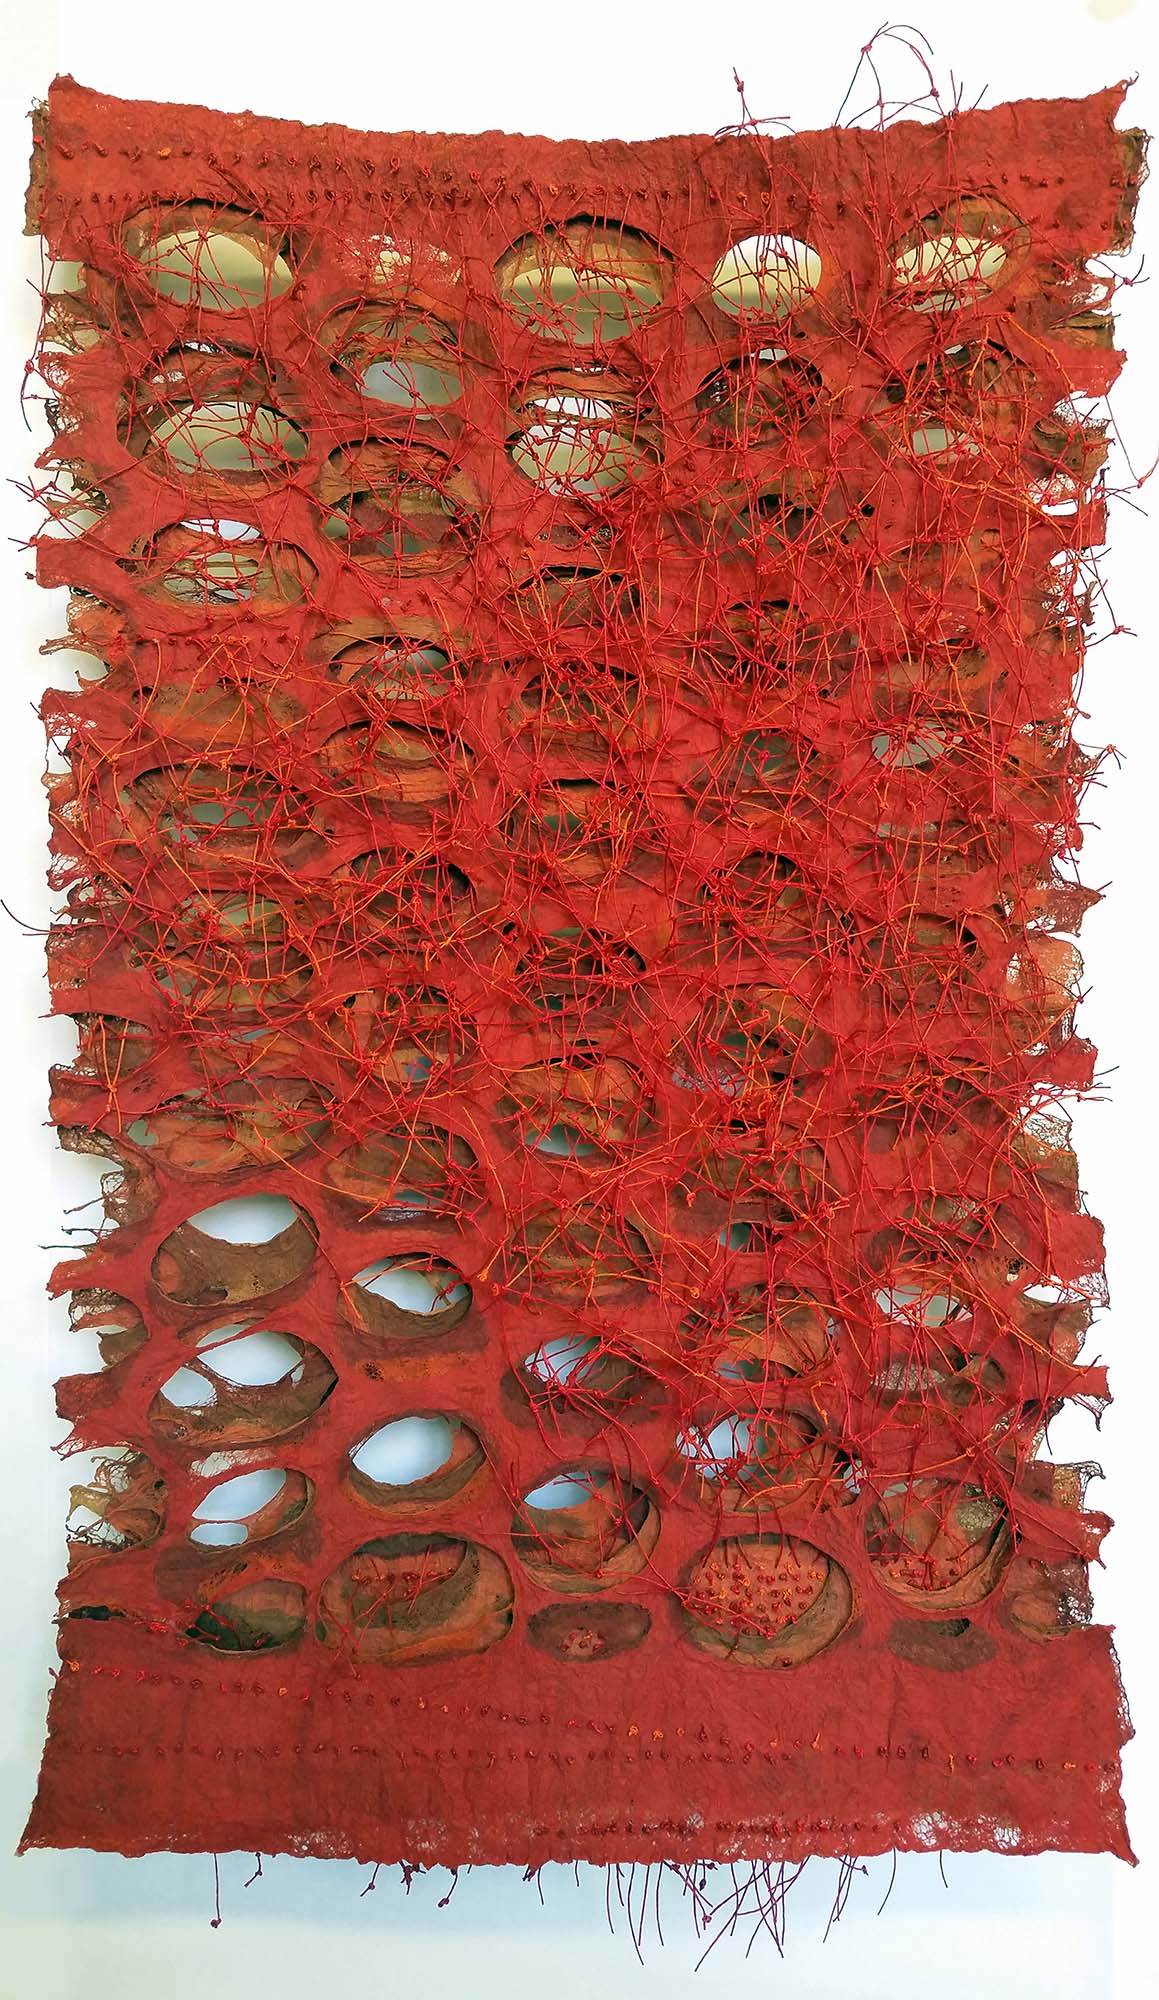 Jiyoung Chung, One-of-a-kind joomchi with paper yarn. ©2021 Jiyoung Chung. Courtesy of the artist.